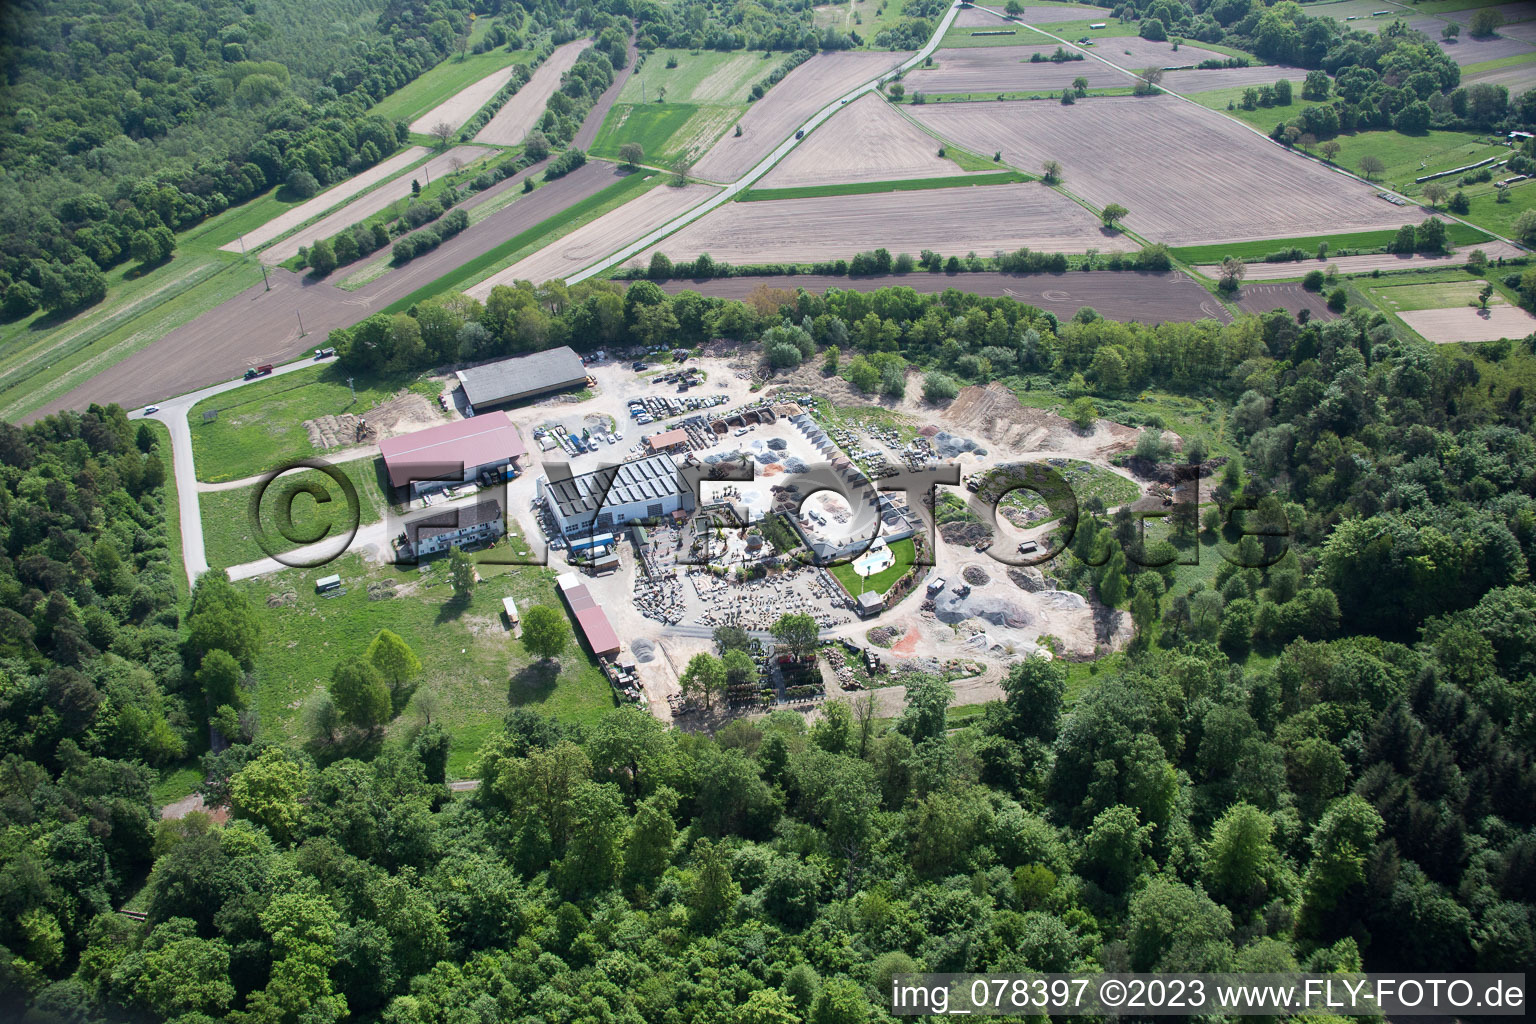 Aerial photograpy of Palatinum landscape and garden design in Hagenbach in the state Rhineland-Palatinate, Germany